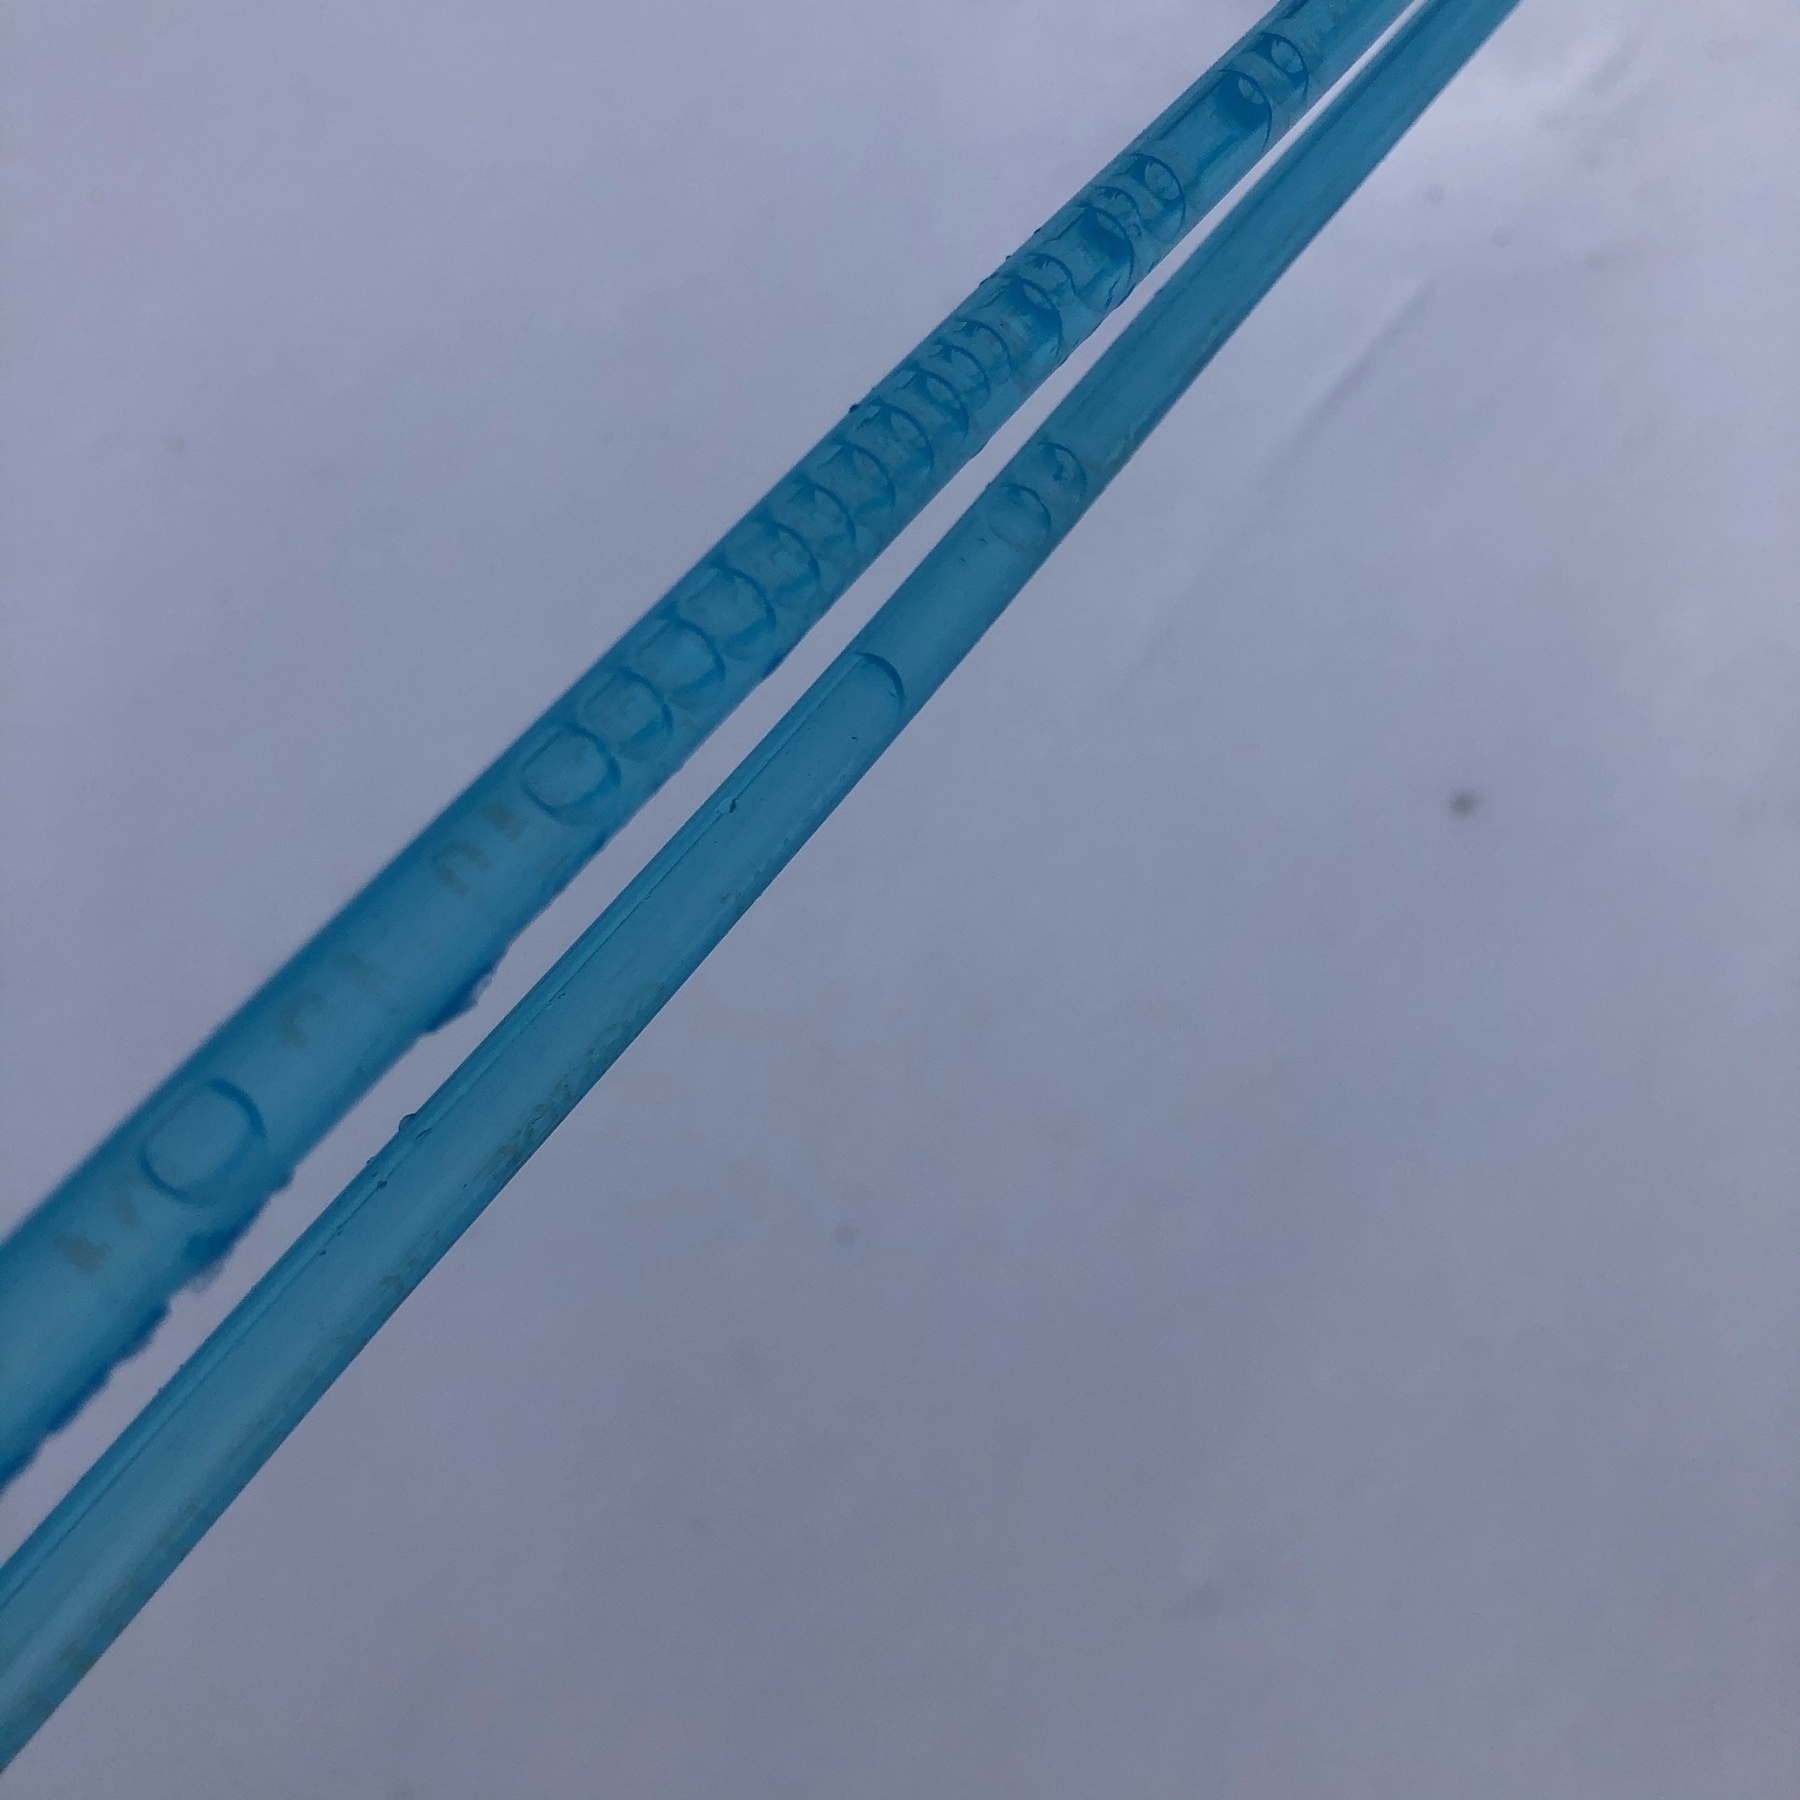 two lines of blue tubing full of bubbles, suspemded over snow